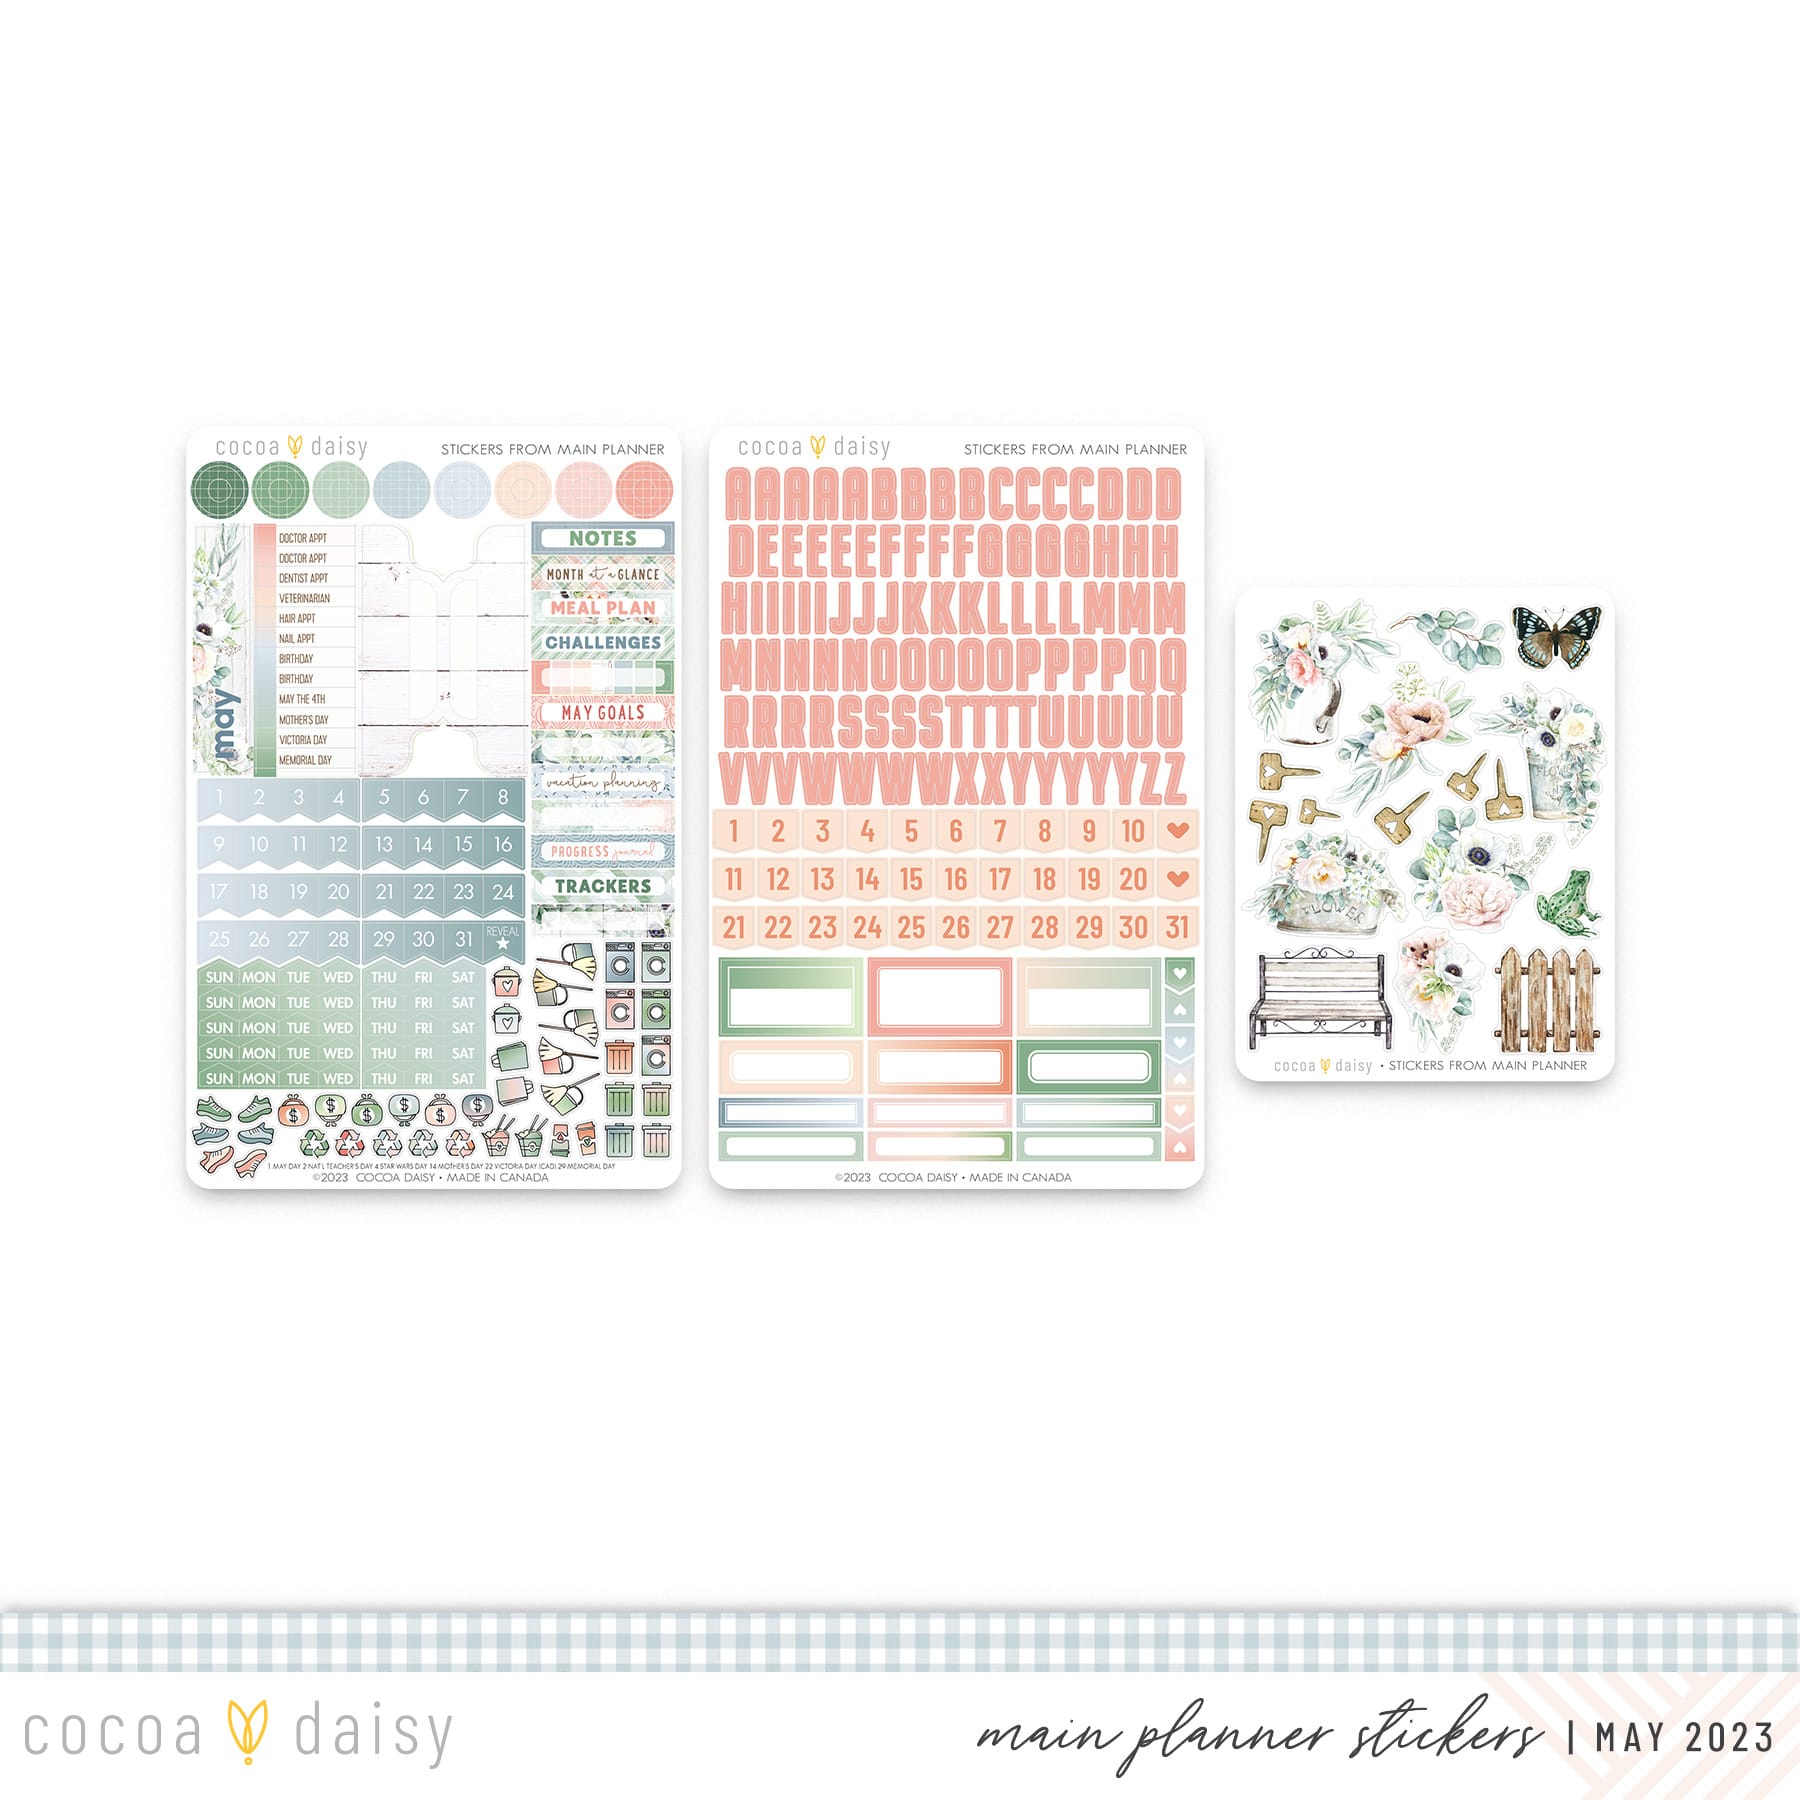 Lillian's Garden Stickers from Main Planner May 2023